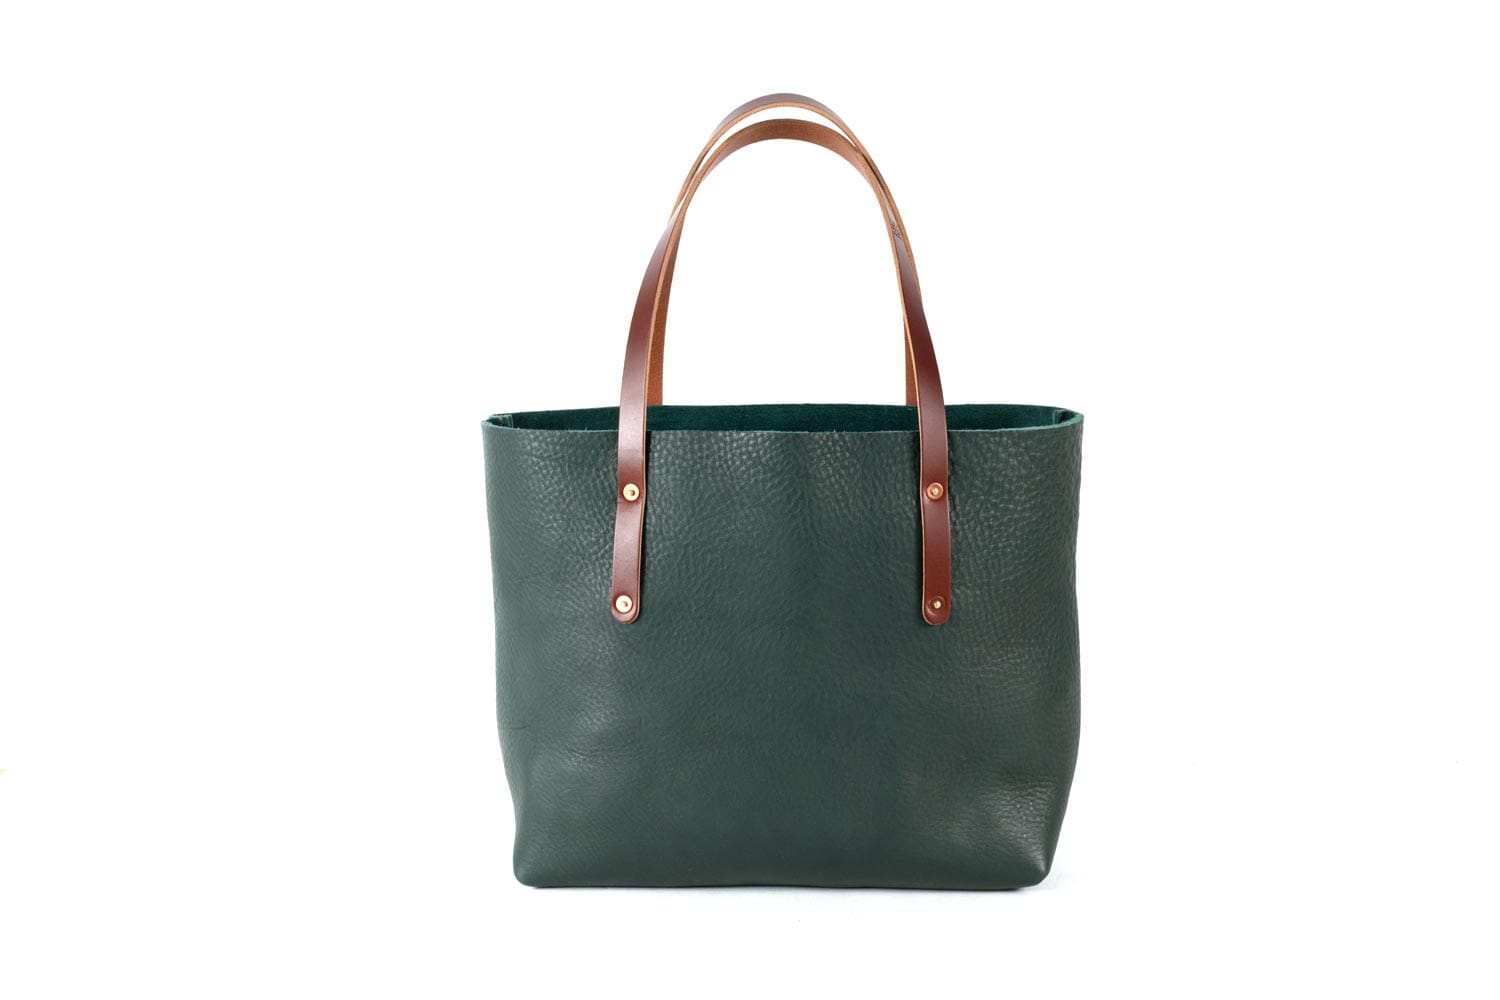 Go Forth Goods Avery Leather Tote Bag